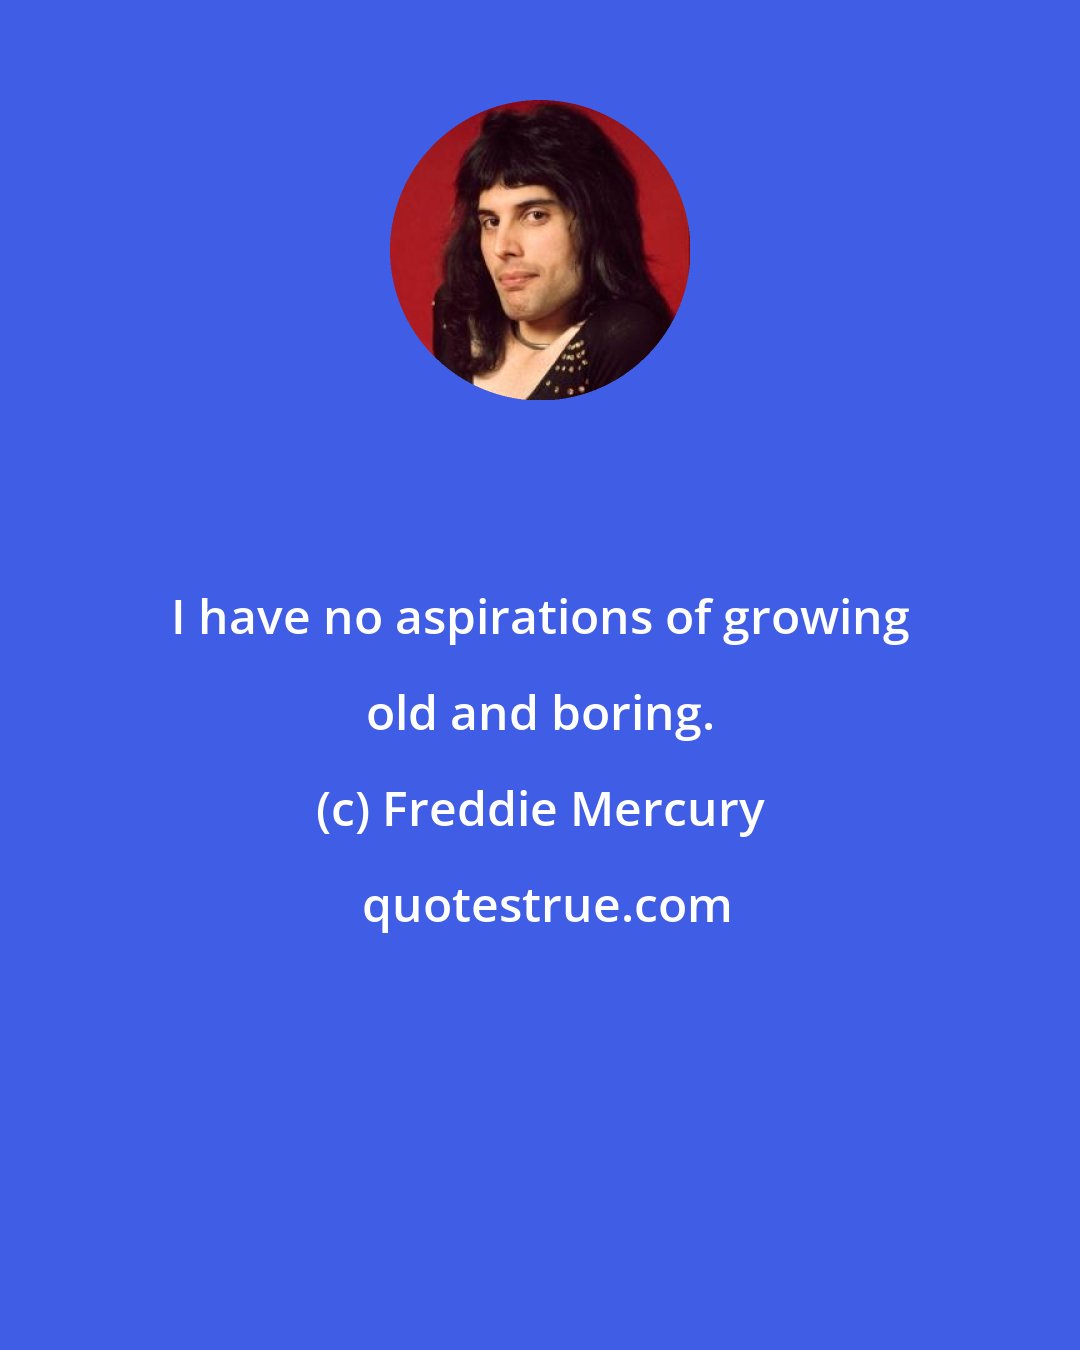 Freddie Mercury: I have no aspirations of growing old and boring.